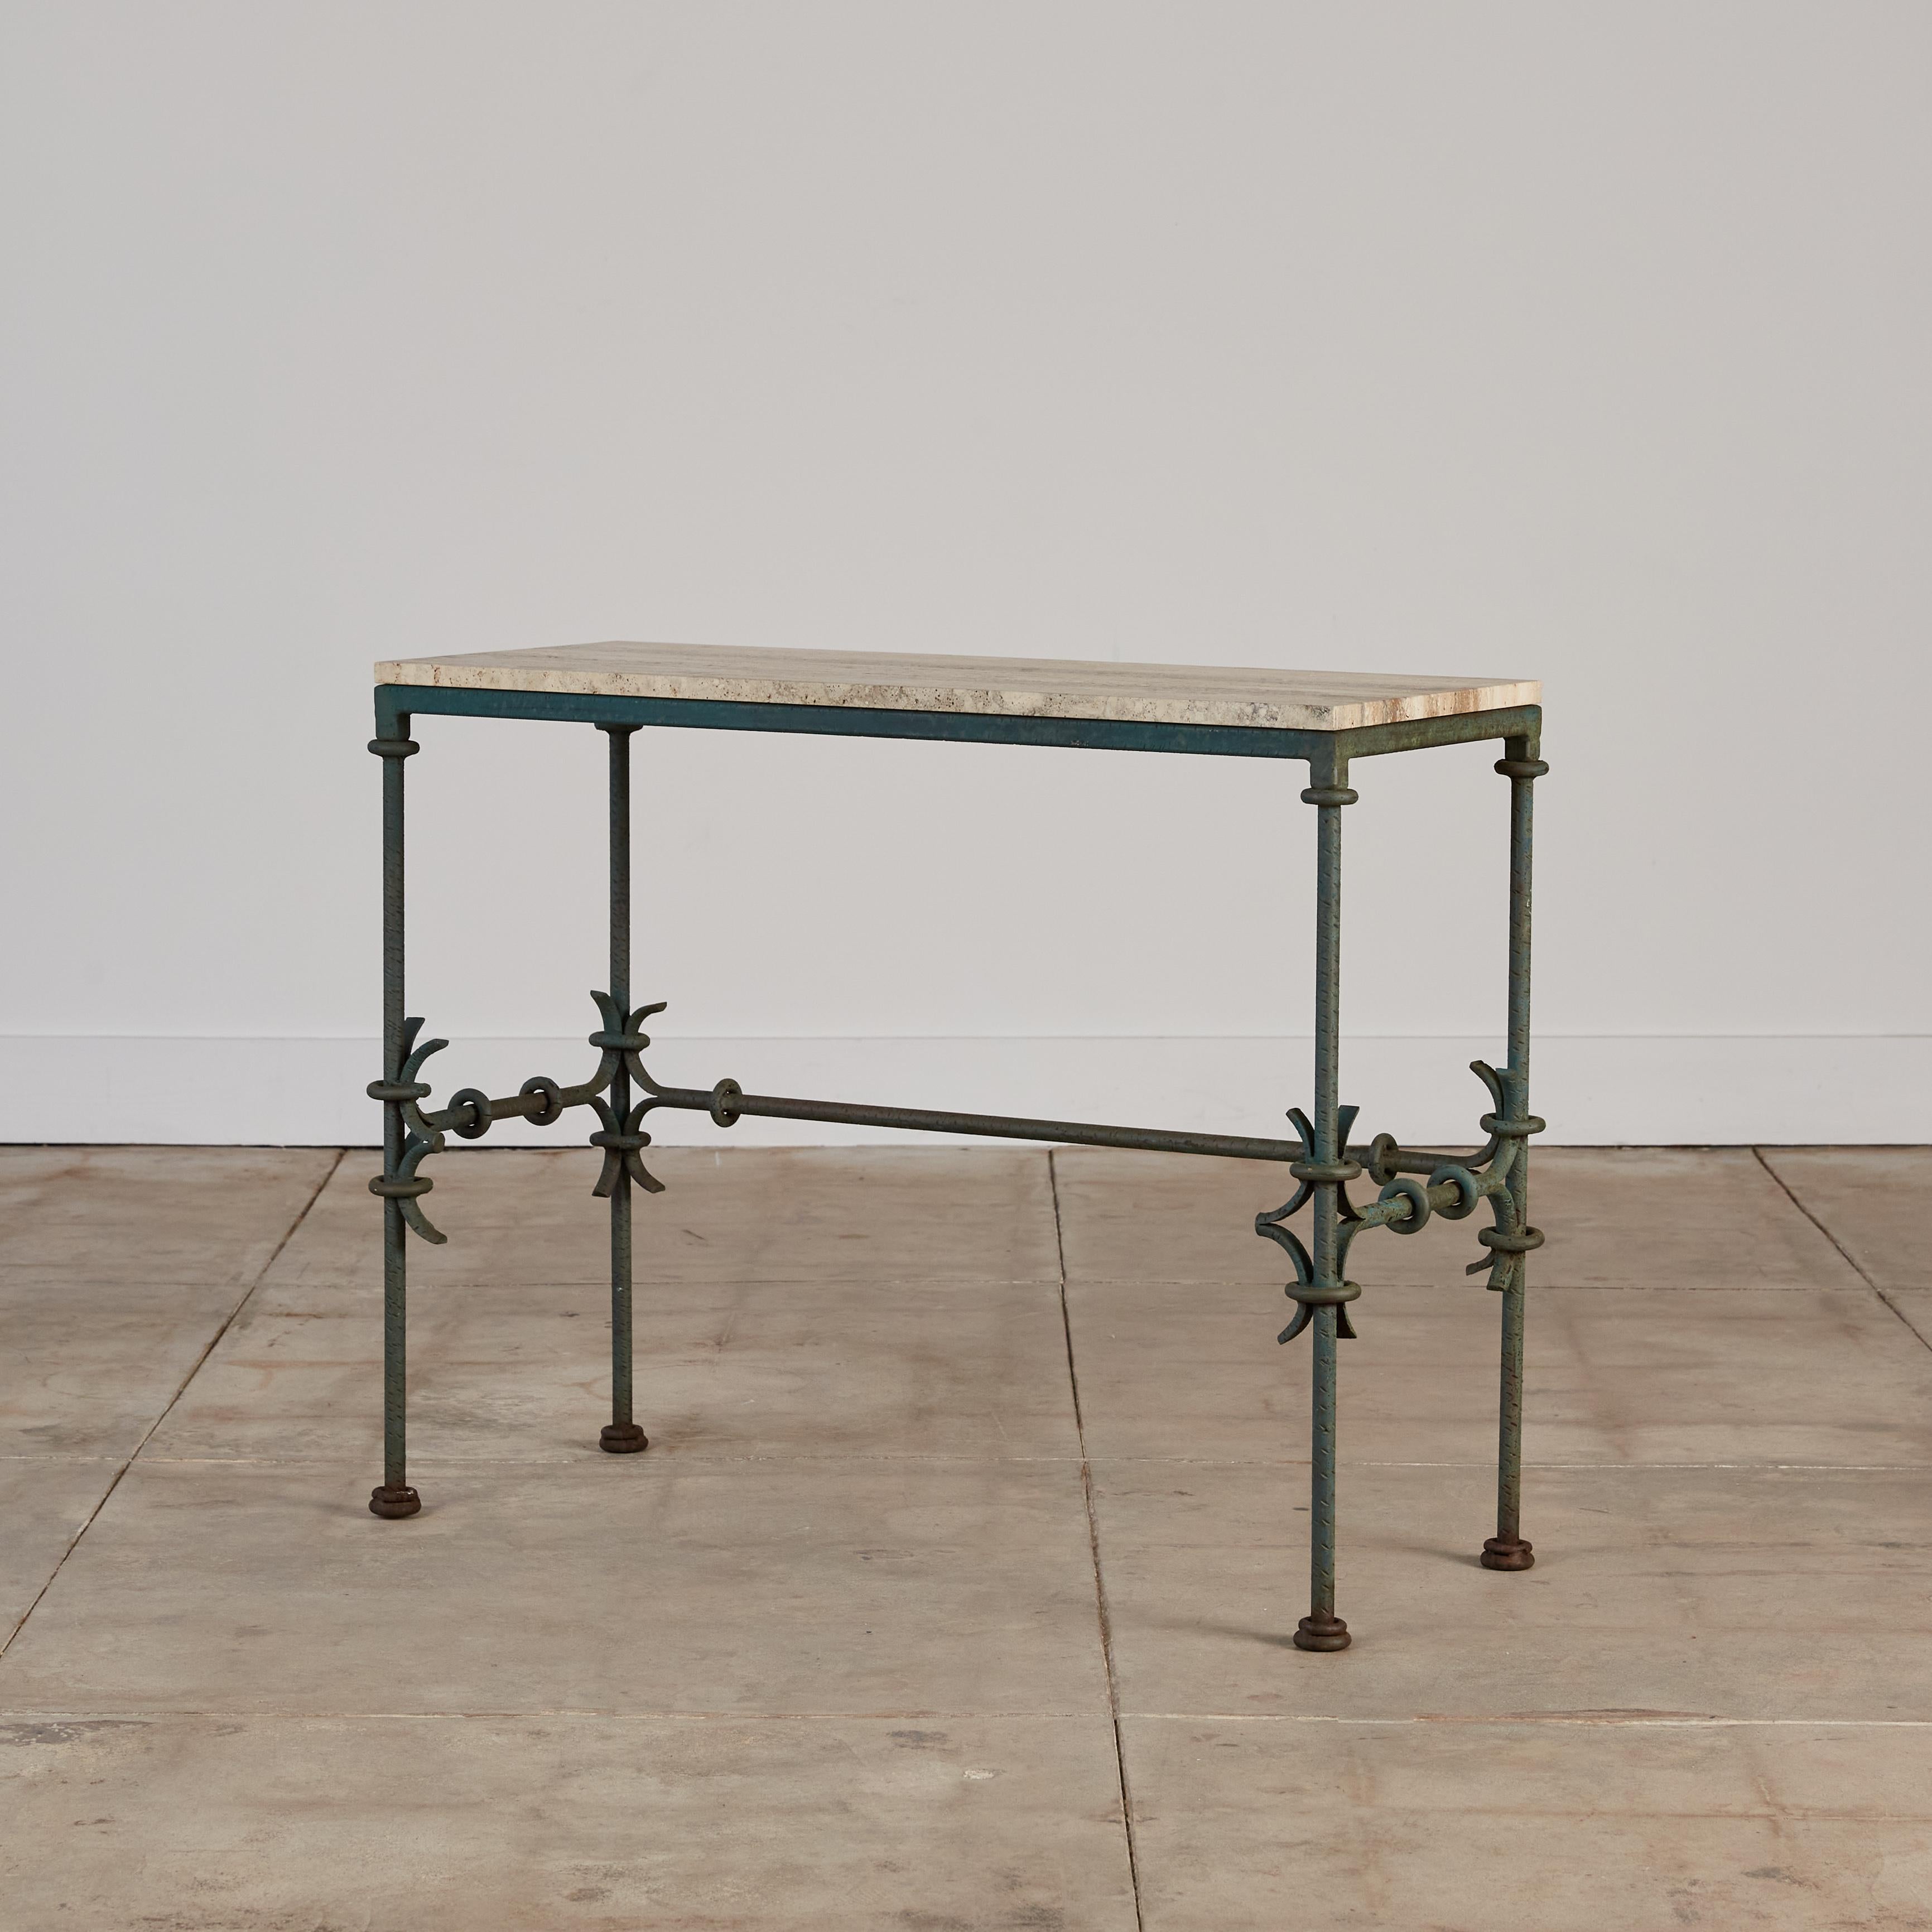 This wrought iron console table with an exquisite patina features a travertine top with beautiful veining and masterful metalwork. The base is decorated with stylized round design elements that wrap around the legs. The way the metal curves is